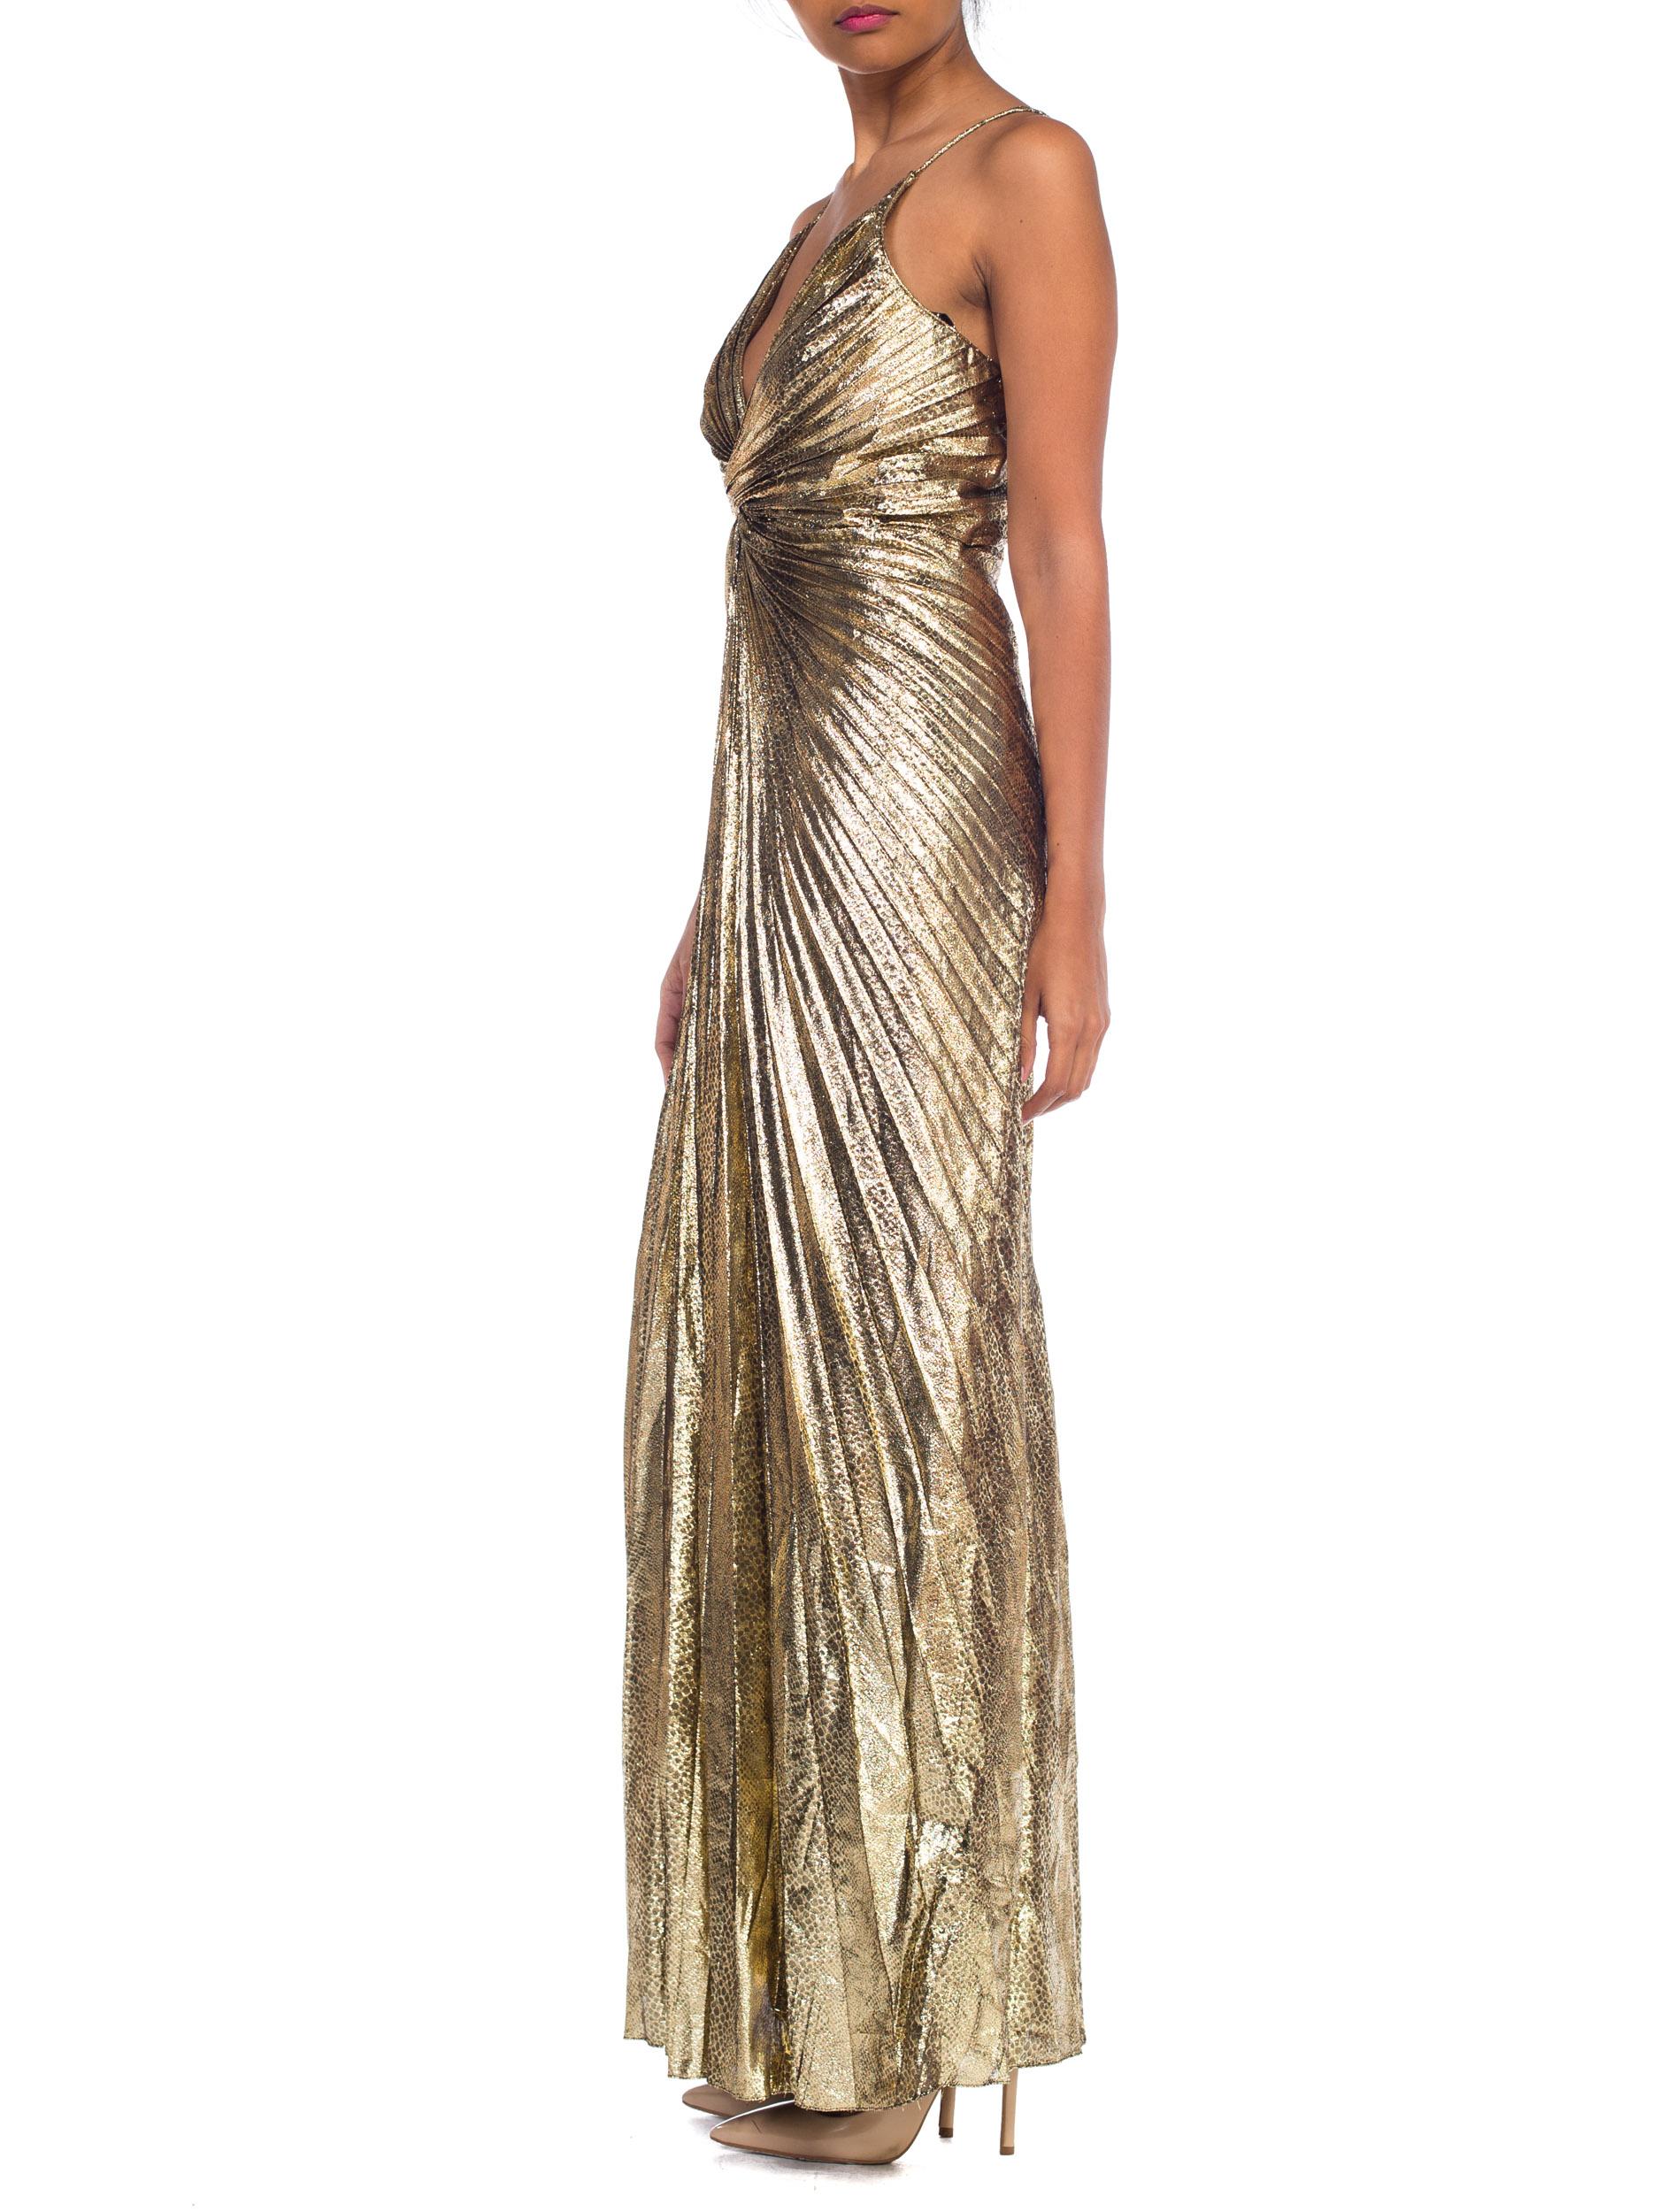 Iconic Travilla Gold Lamé Marilyn Monroe Disco Halter Gown 3